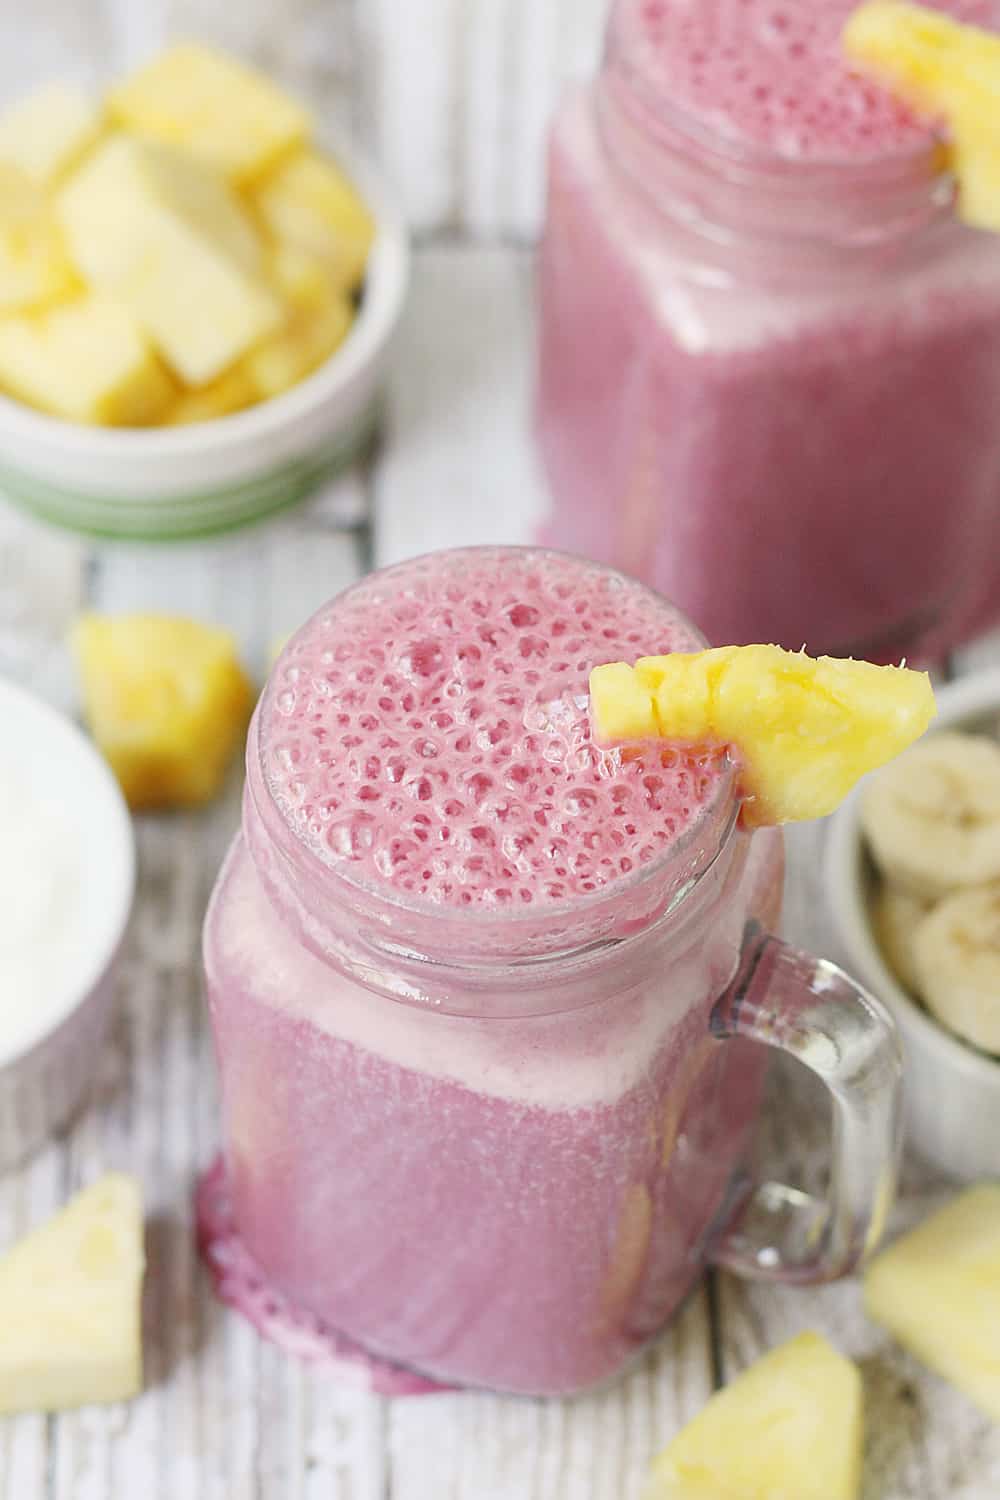 4-Ingredient Pineapple Cranberry Smoothie -- Cranberry lovers will enjoy this 4-ingredient pineapple cranberry smoothie! It features all-natural cranberry juice, frozen pineapple and banana, and Greek yogurt for a tart, good-for-you smoothie!